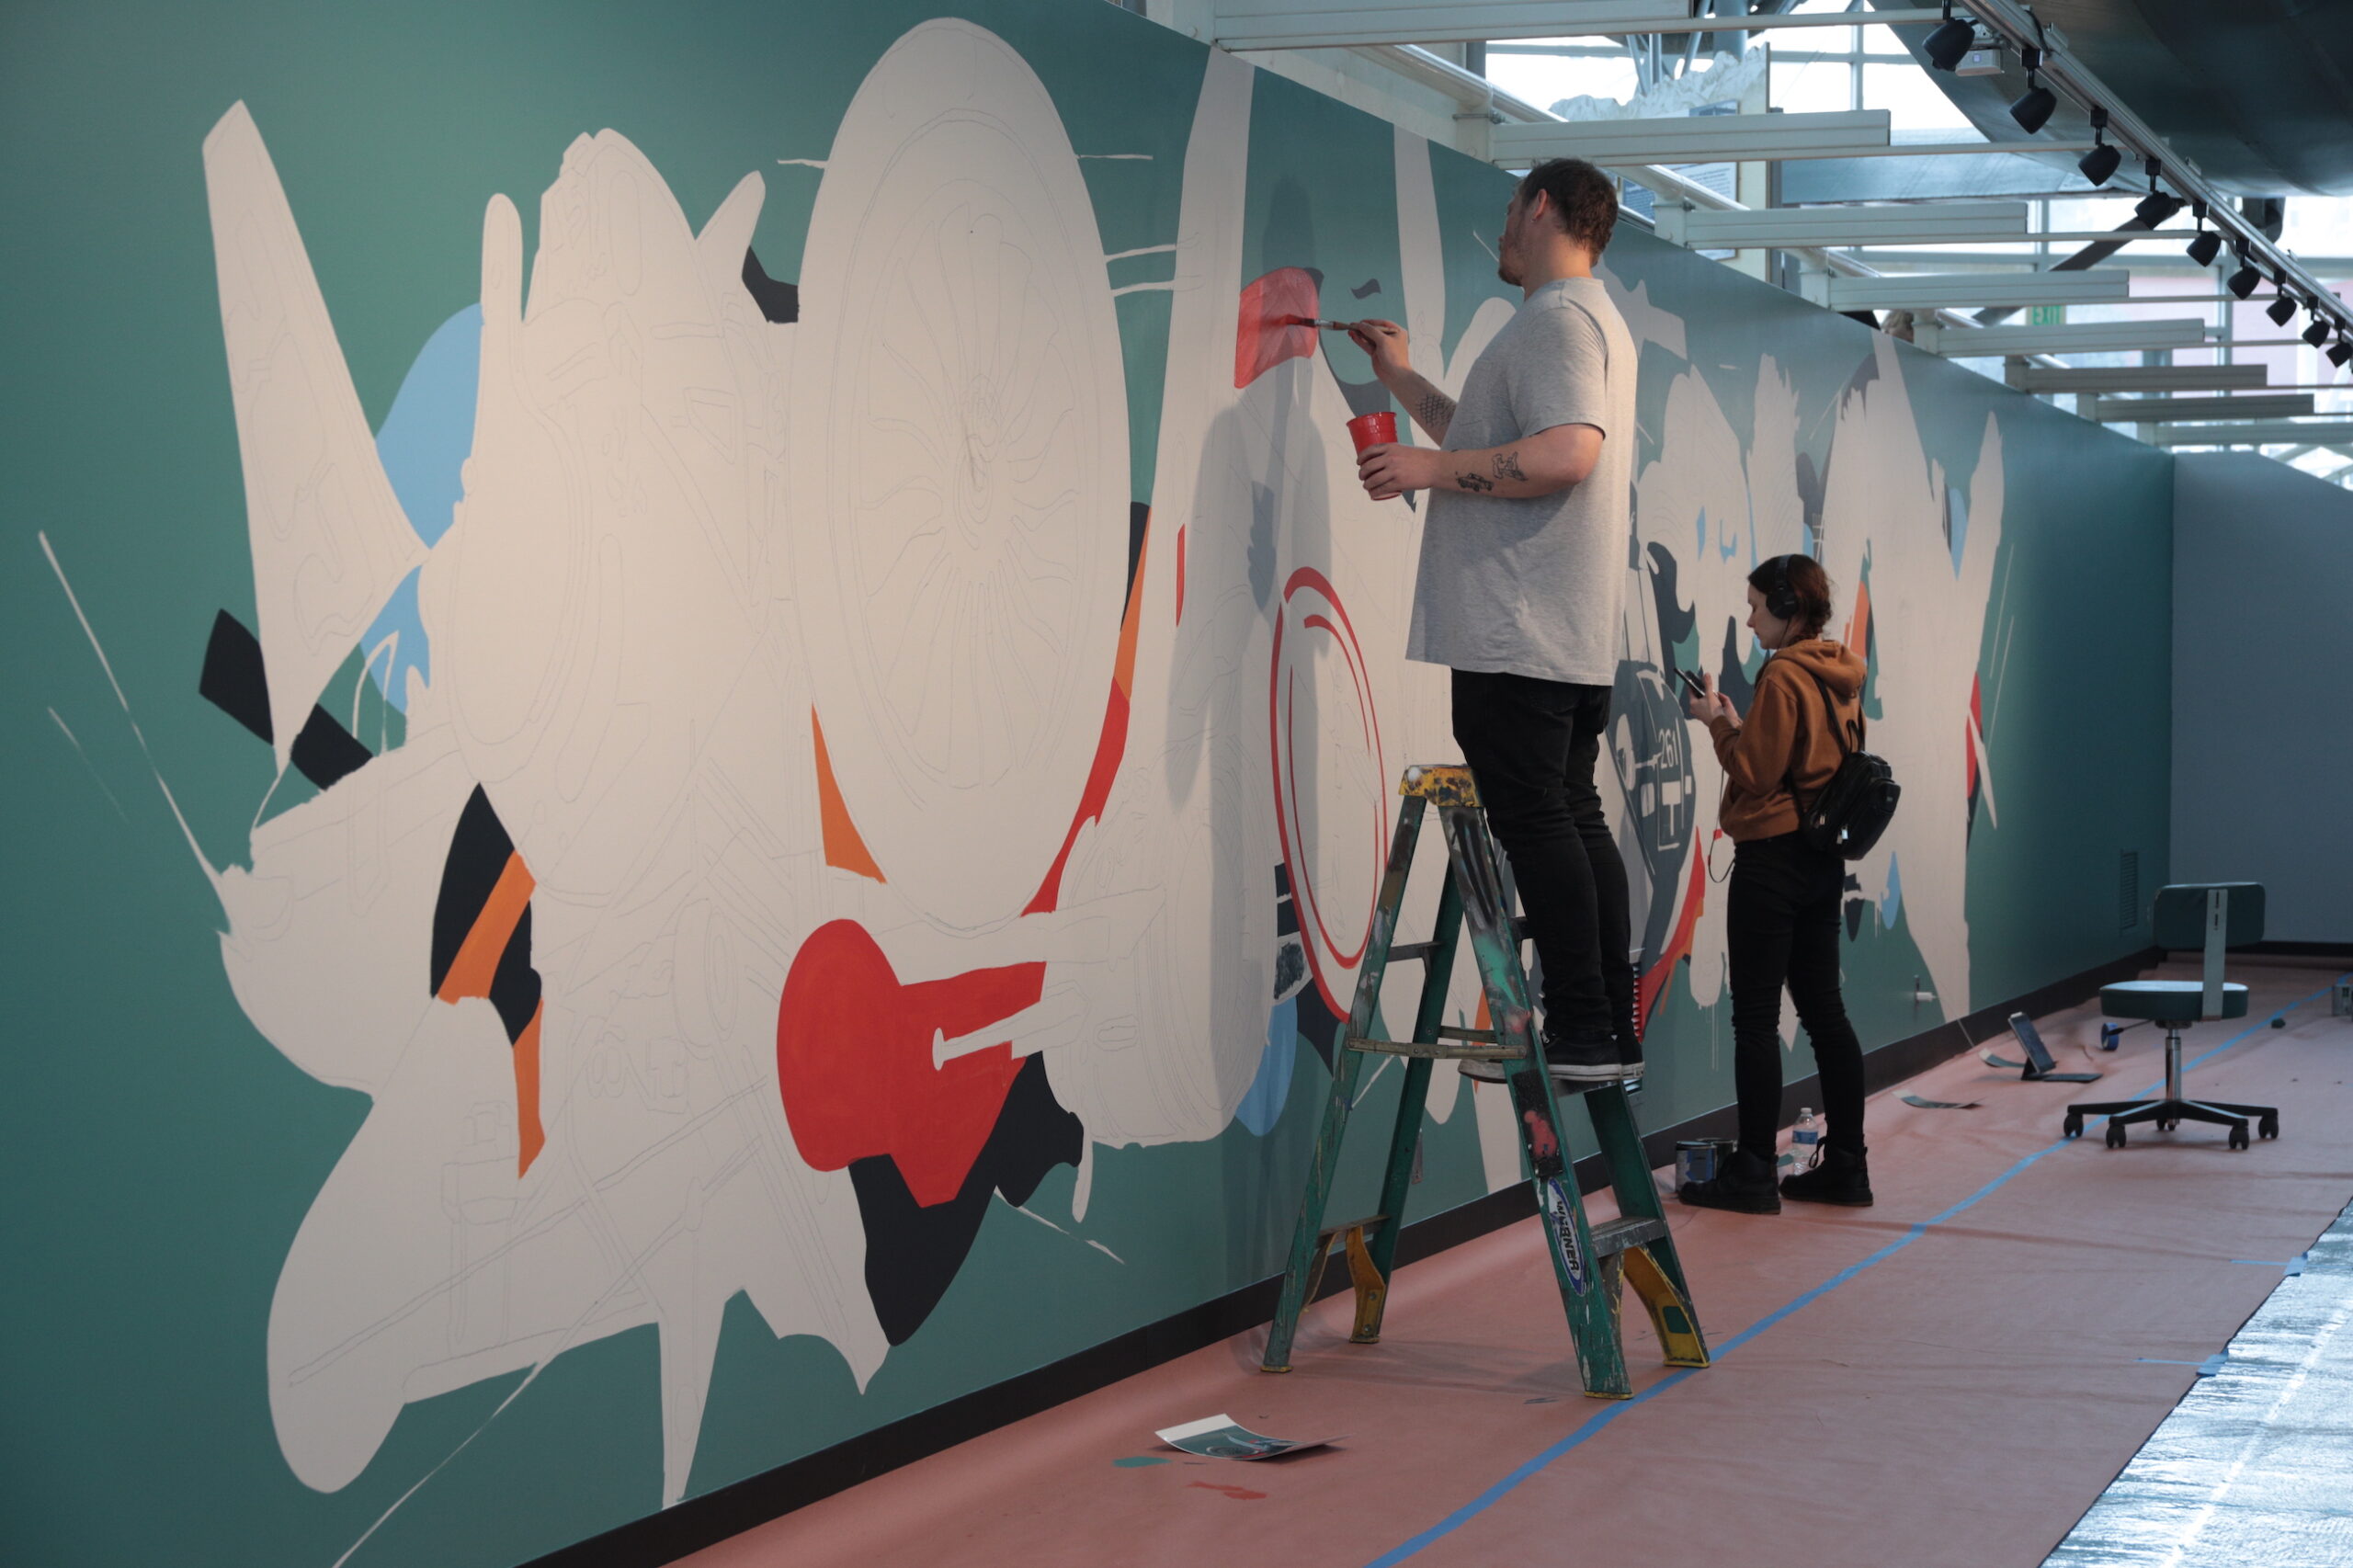 A partially finished mural is being worked on by two painters, with one standing on a ladder.